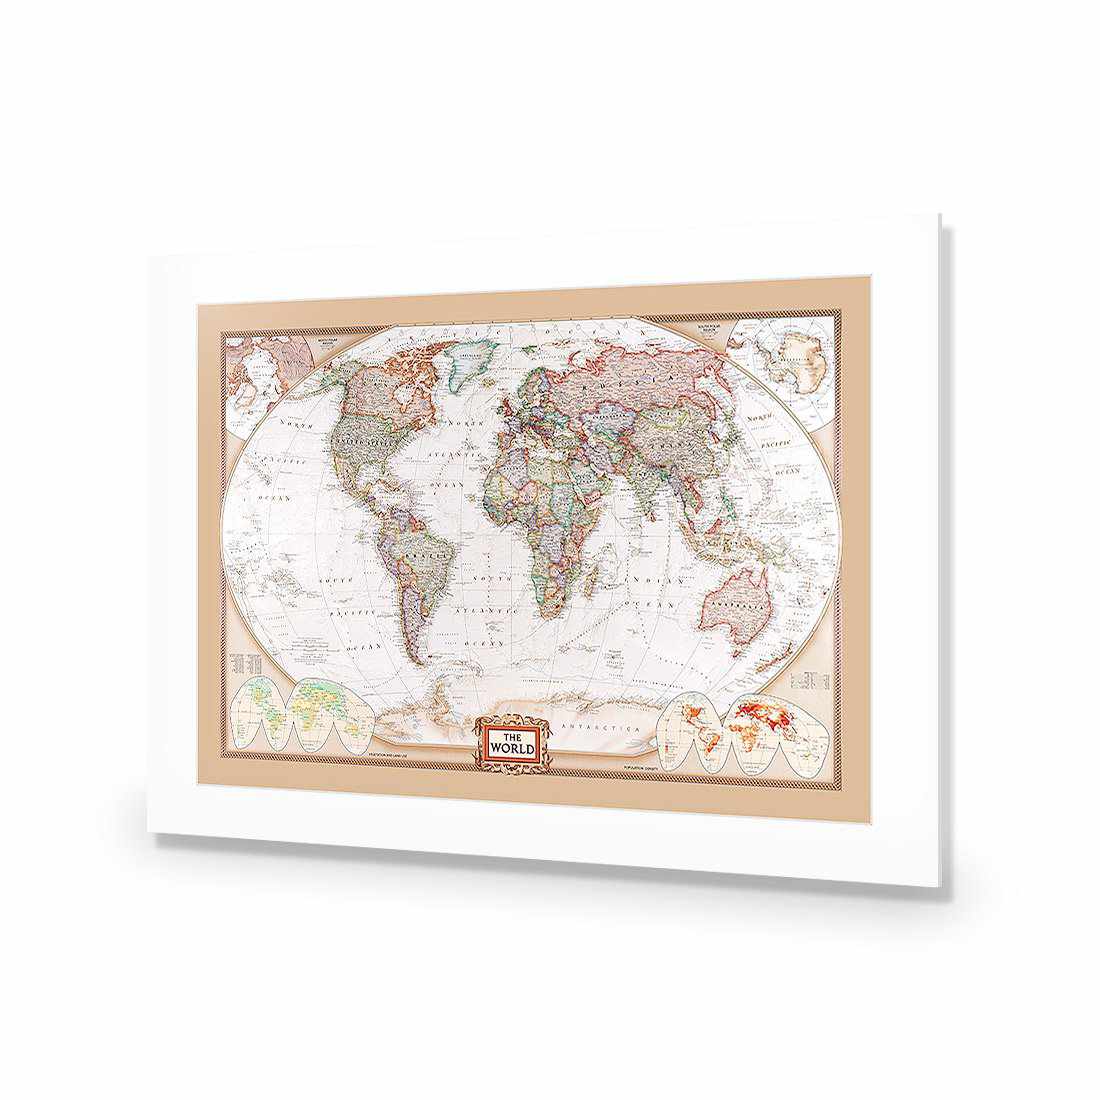 The World Map-Acrylic-Wall Art Design-With Border-Acrylic - No Frame-45x30cm-Wall Art Designs